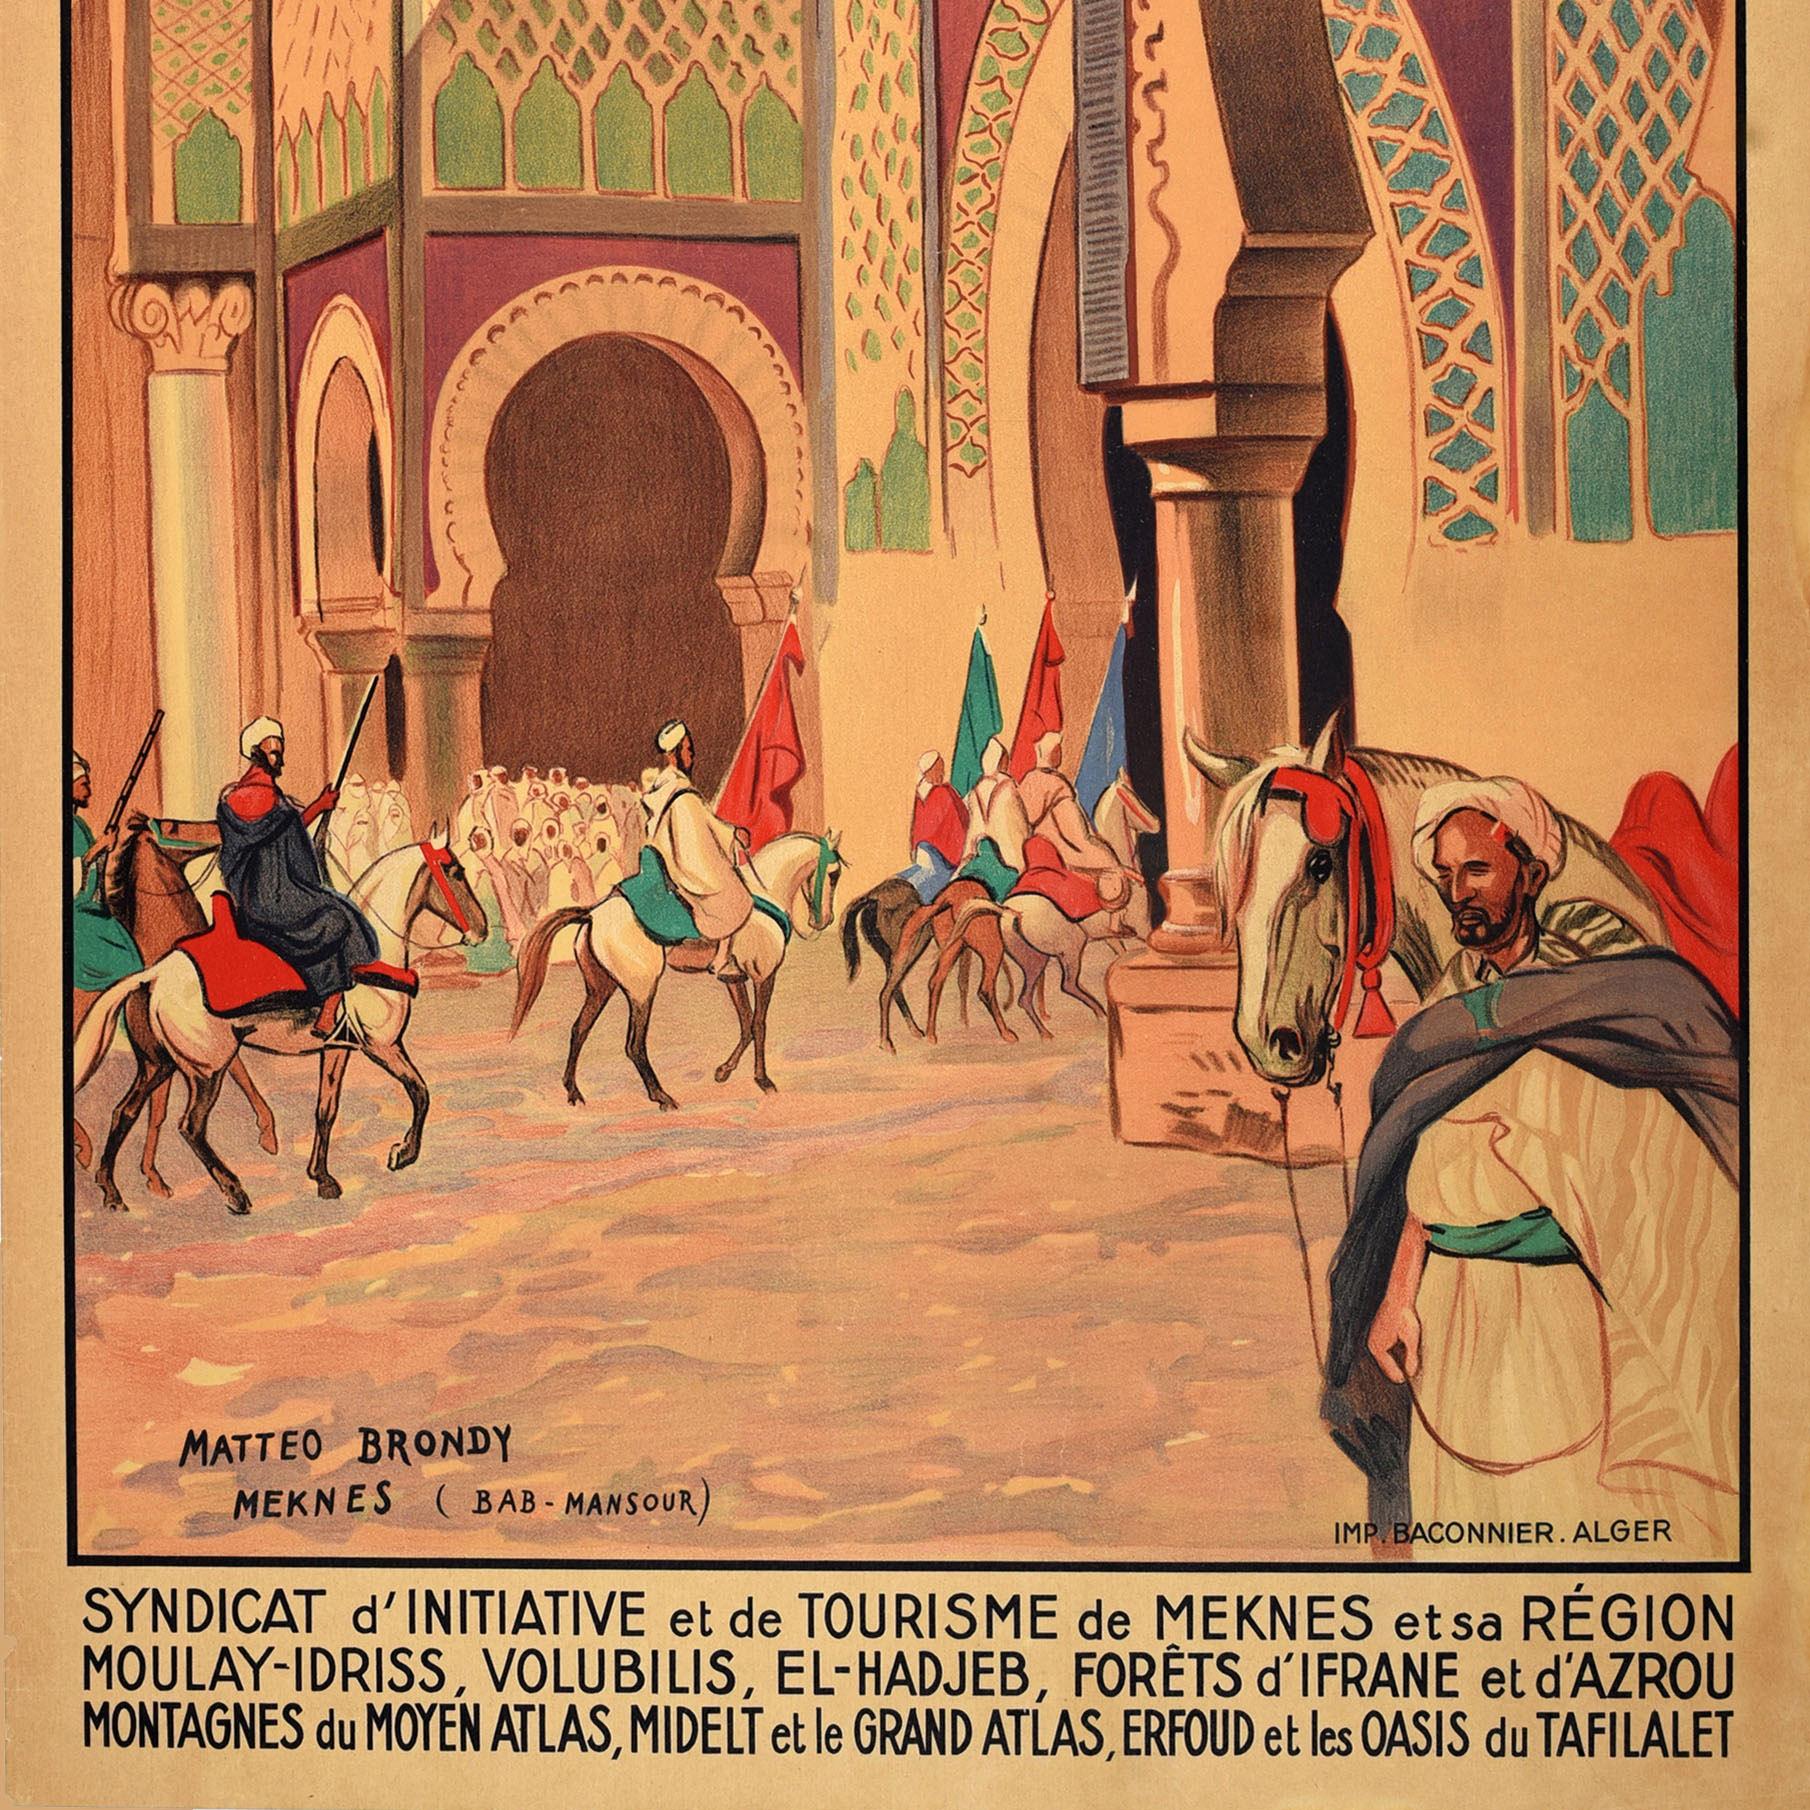 Original Antique North Africa Travel Poster Meknes Morocco Bab Mansour Brondy In Good Condition For Sale In London, GB